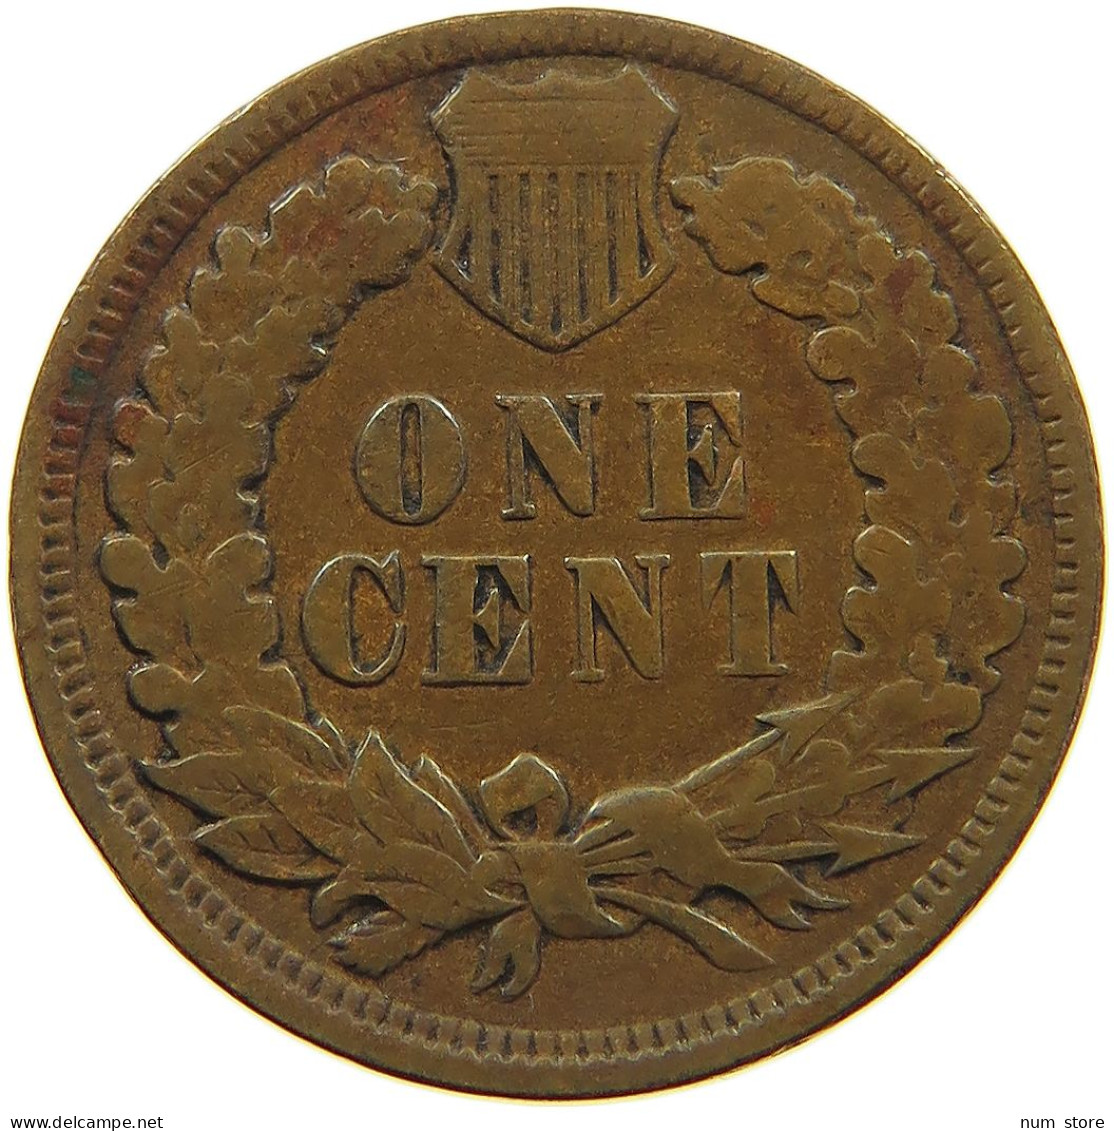 UNITED STATES OF AMERICA CENT 1898 INDIAN HEAD #c083 0617 - 1859-1909: Indian Head